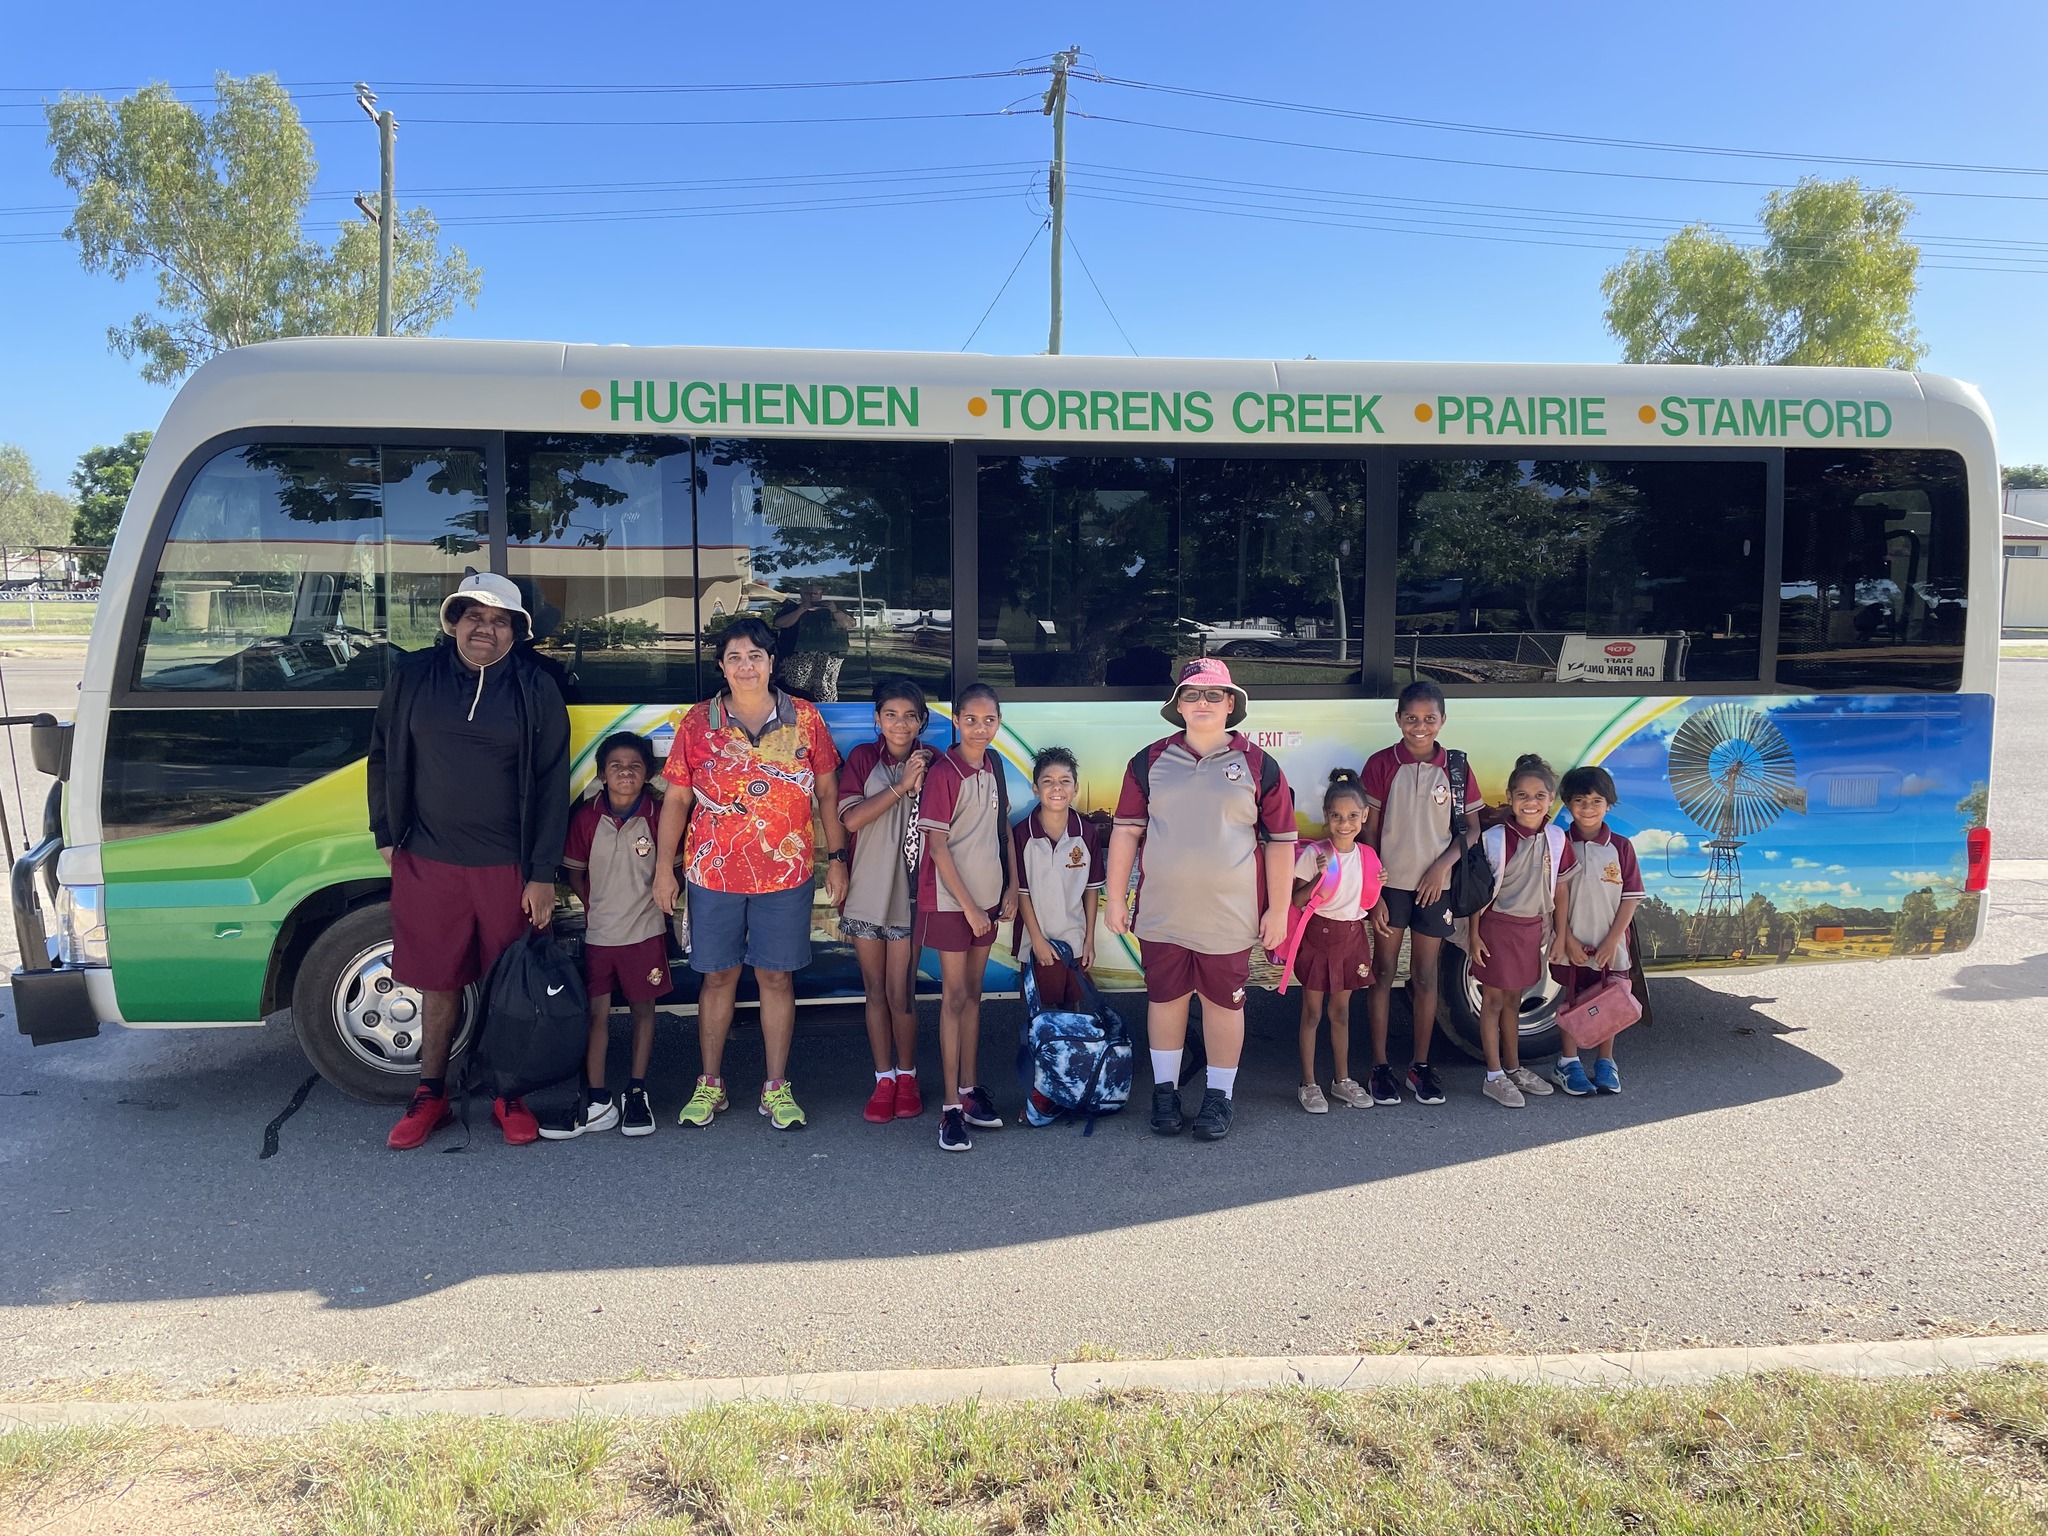 Flinders Shire Council has announced the launch of a new free bus service to support Hughenden students to attend school.